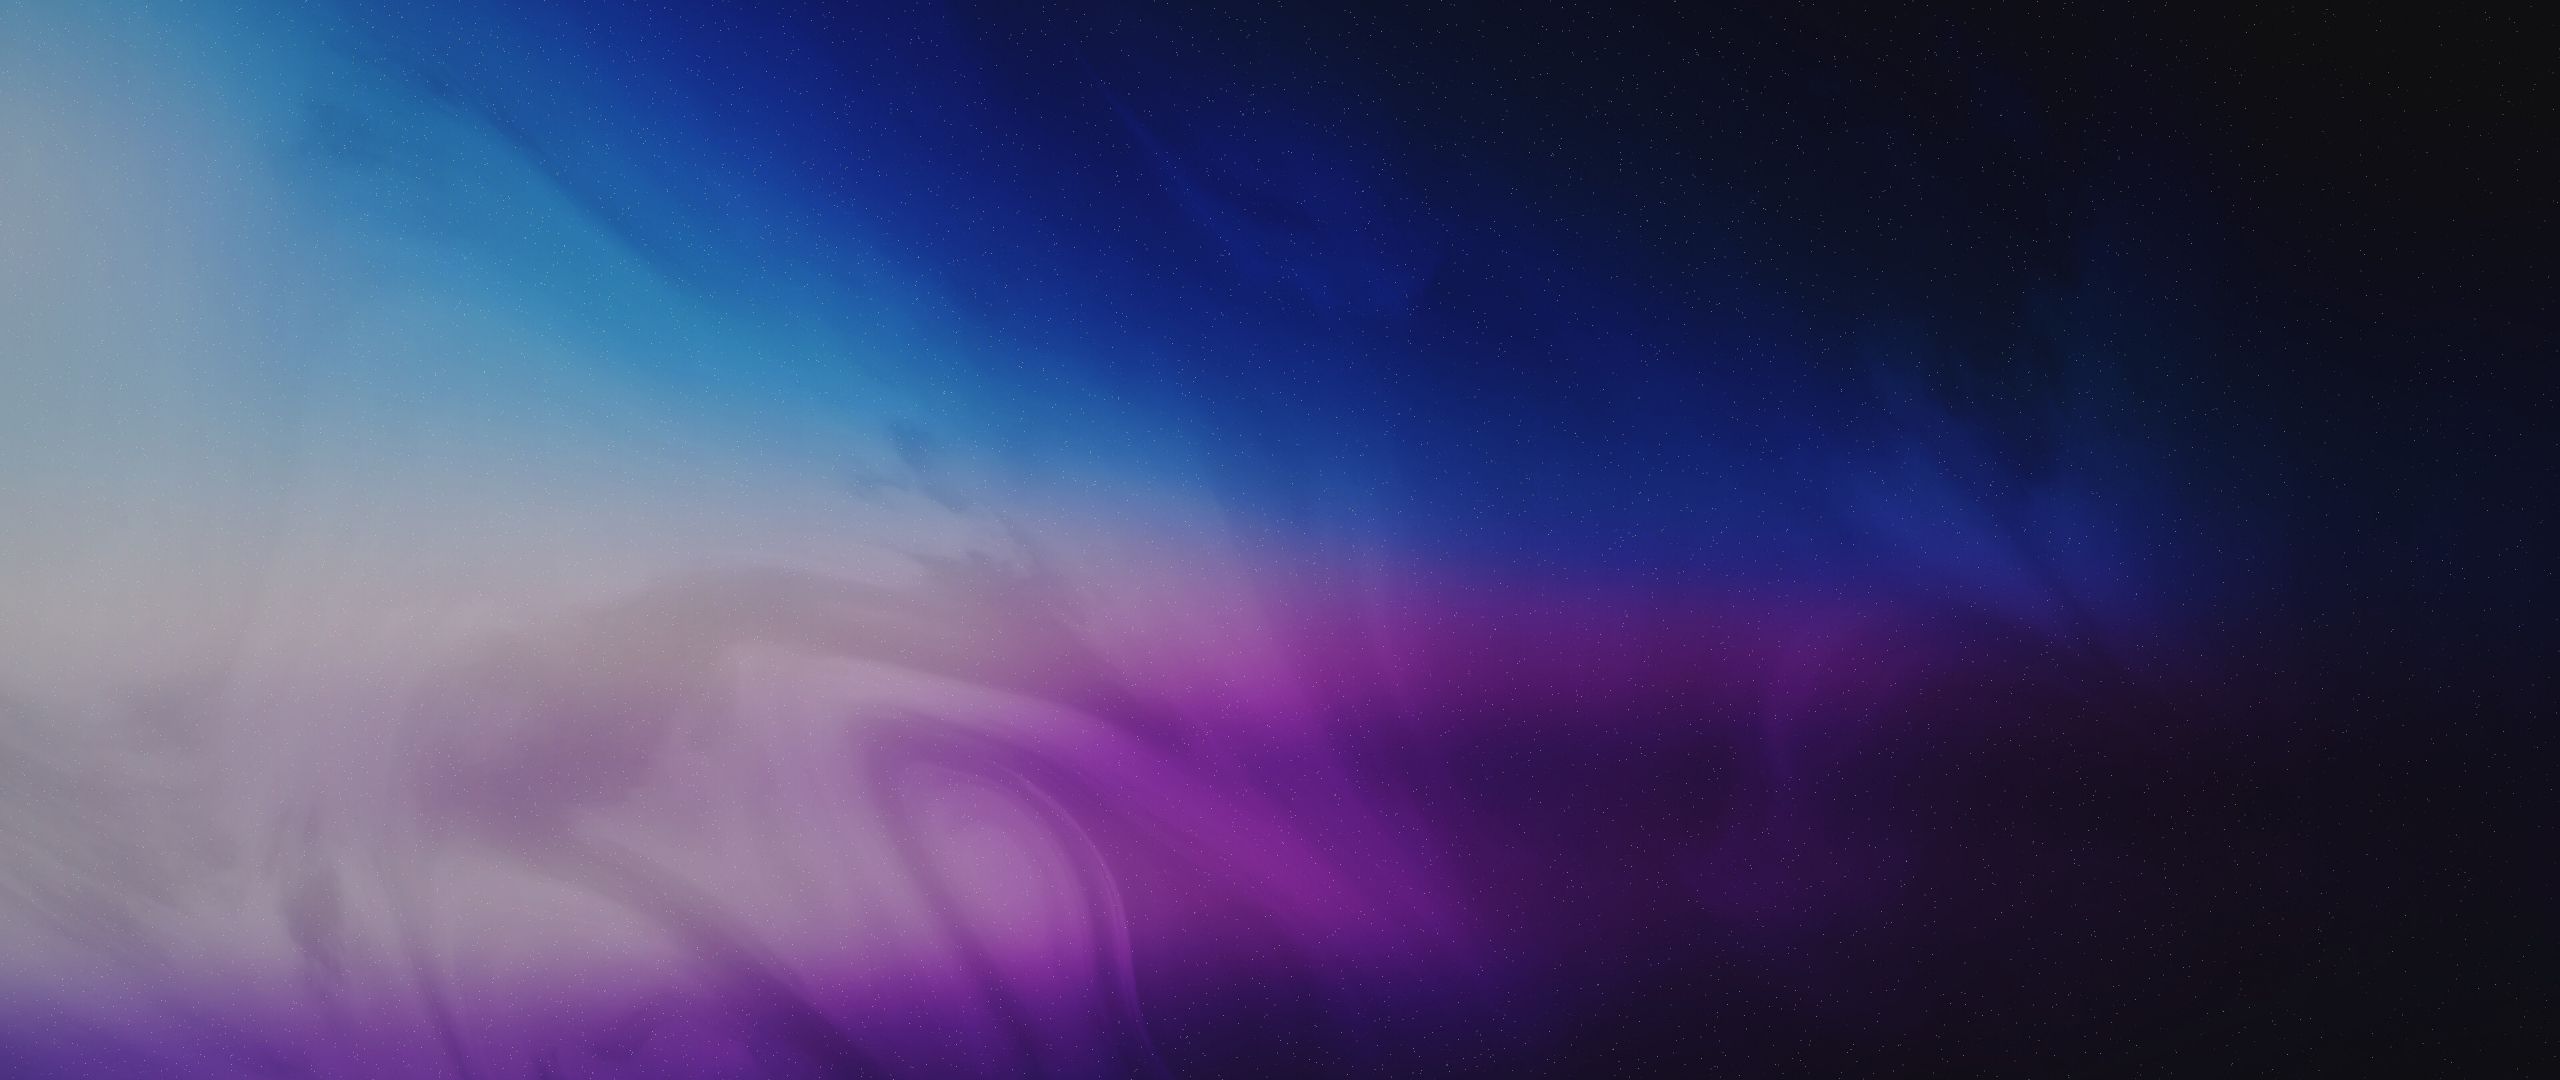 Download 2560x1080 wallpaper dust, colorful, blue and purple